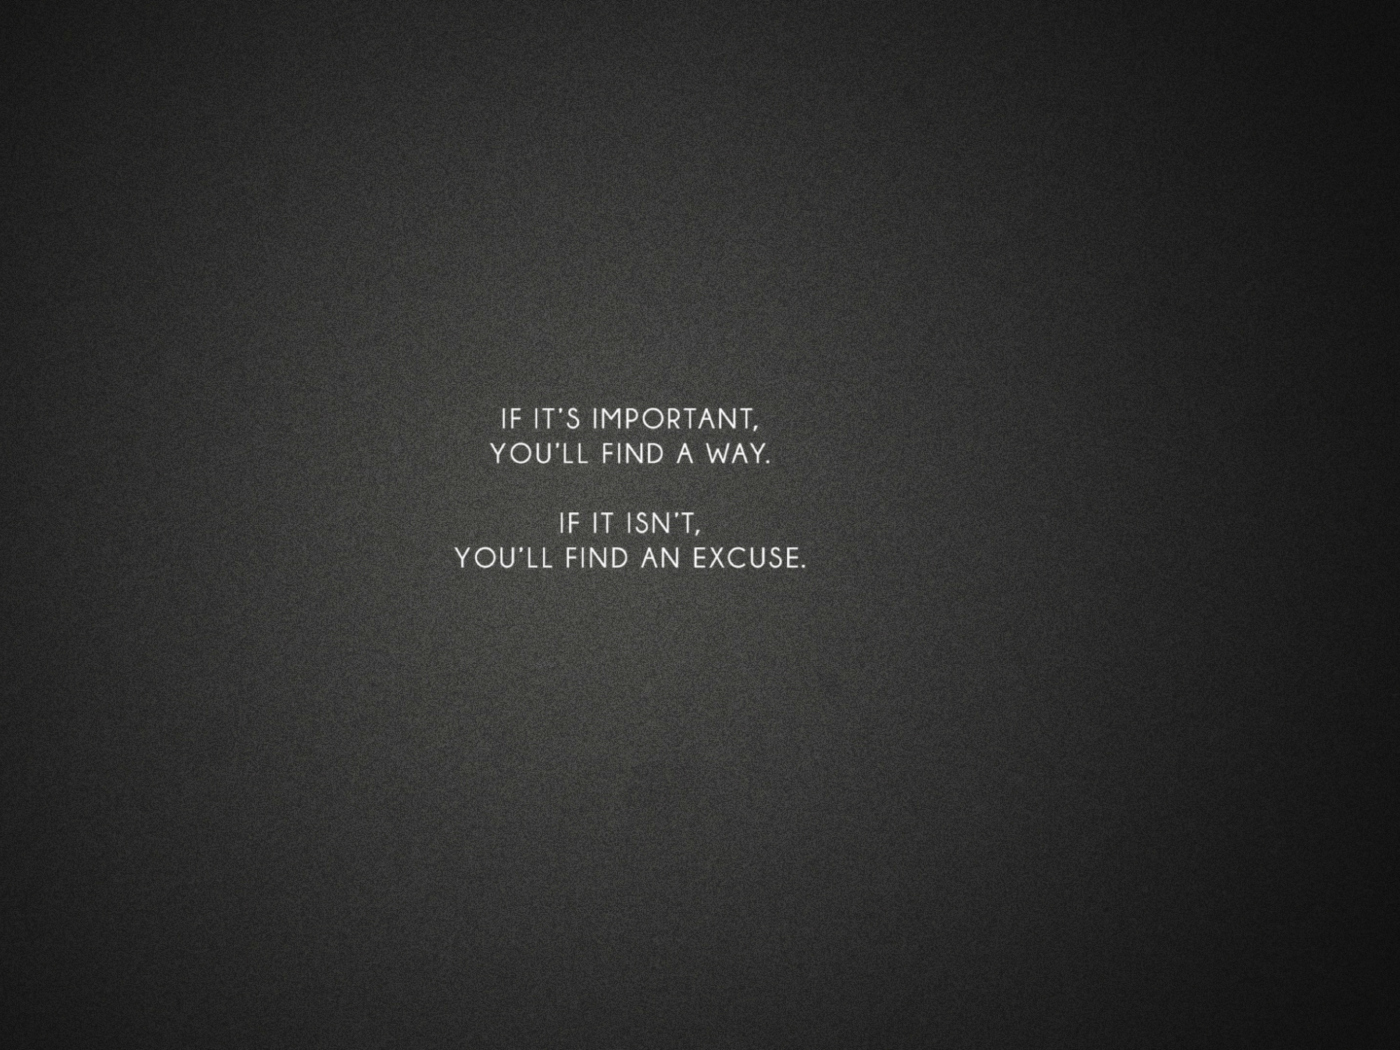 If It's Important You'll Find A Way wallpaper 1400x1050